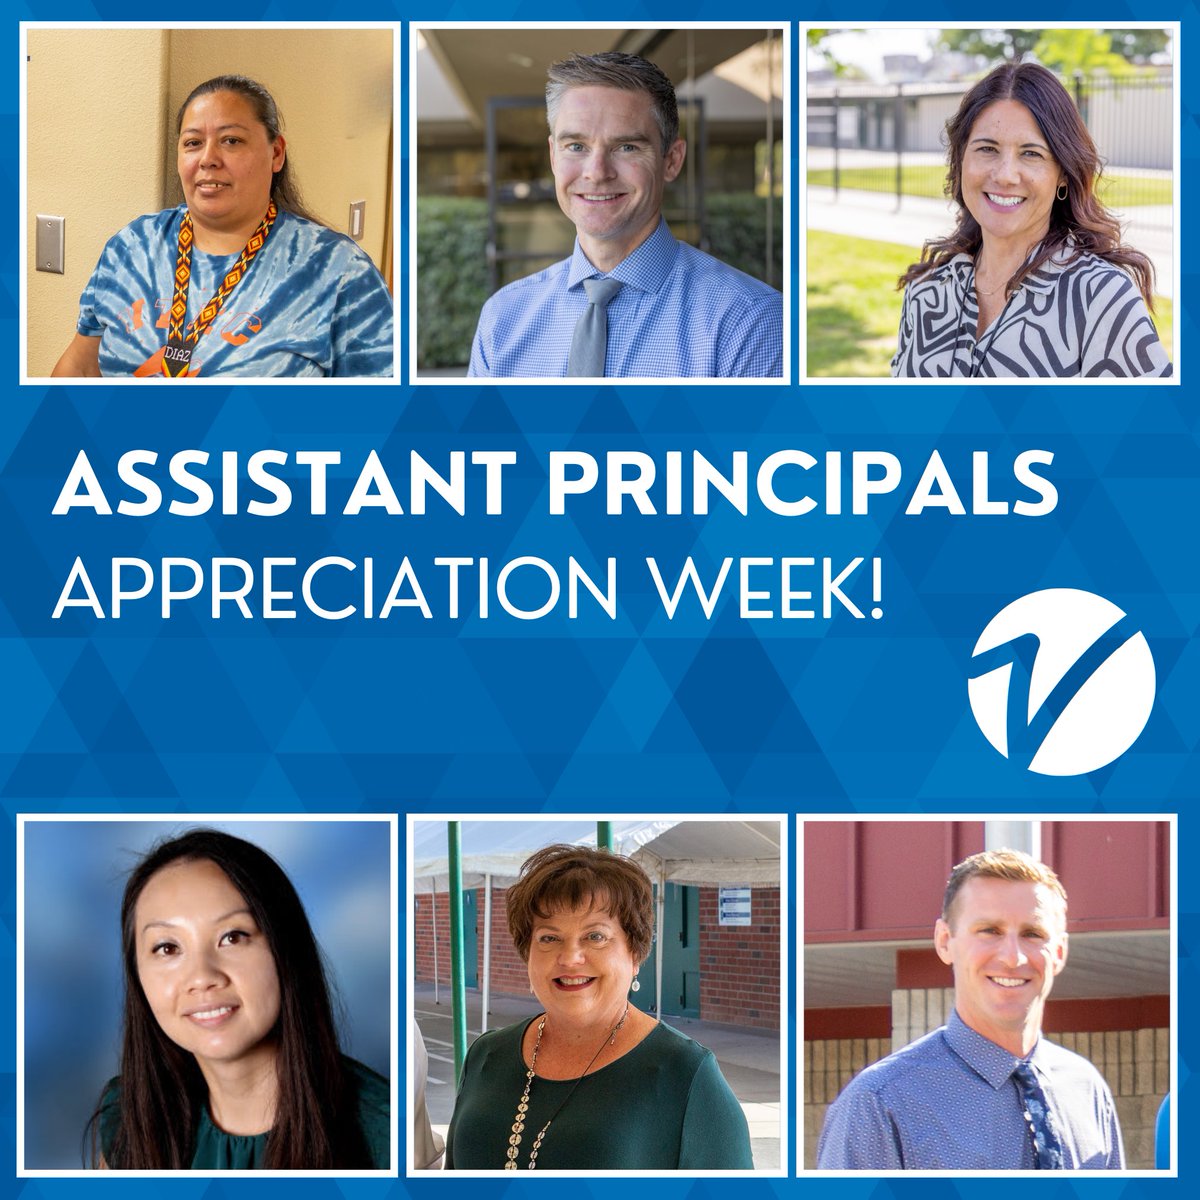 This week, we celebrate all the incredible assistant principals of Visalia Unified. Your leadership, guidance, and passion for education inspire us every day. Thank you for making a difference in the lives of our students and staff. #IamVUSD #APweek24